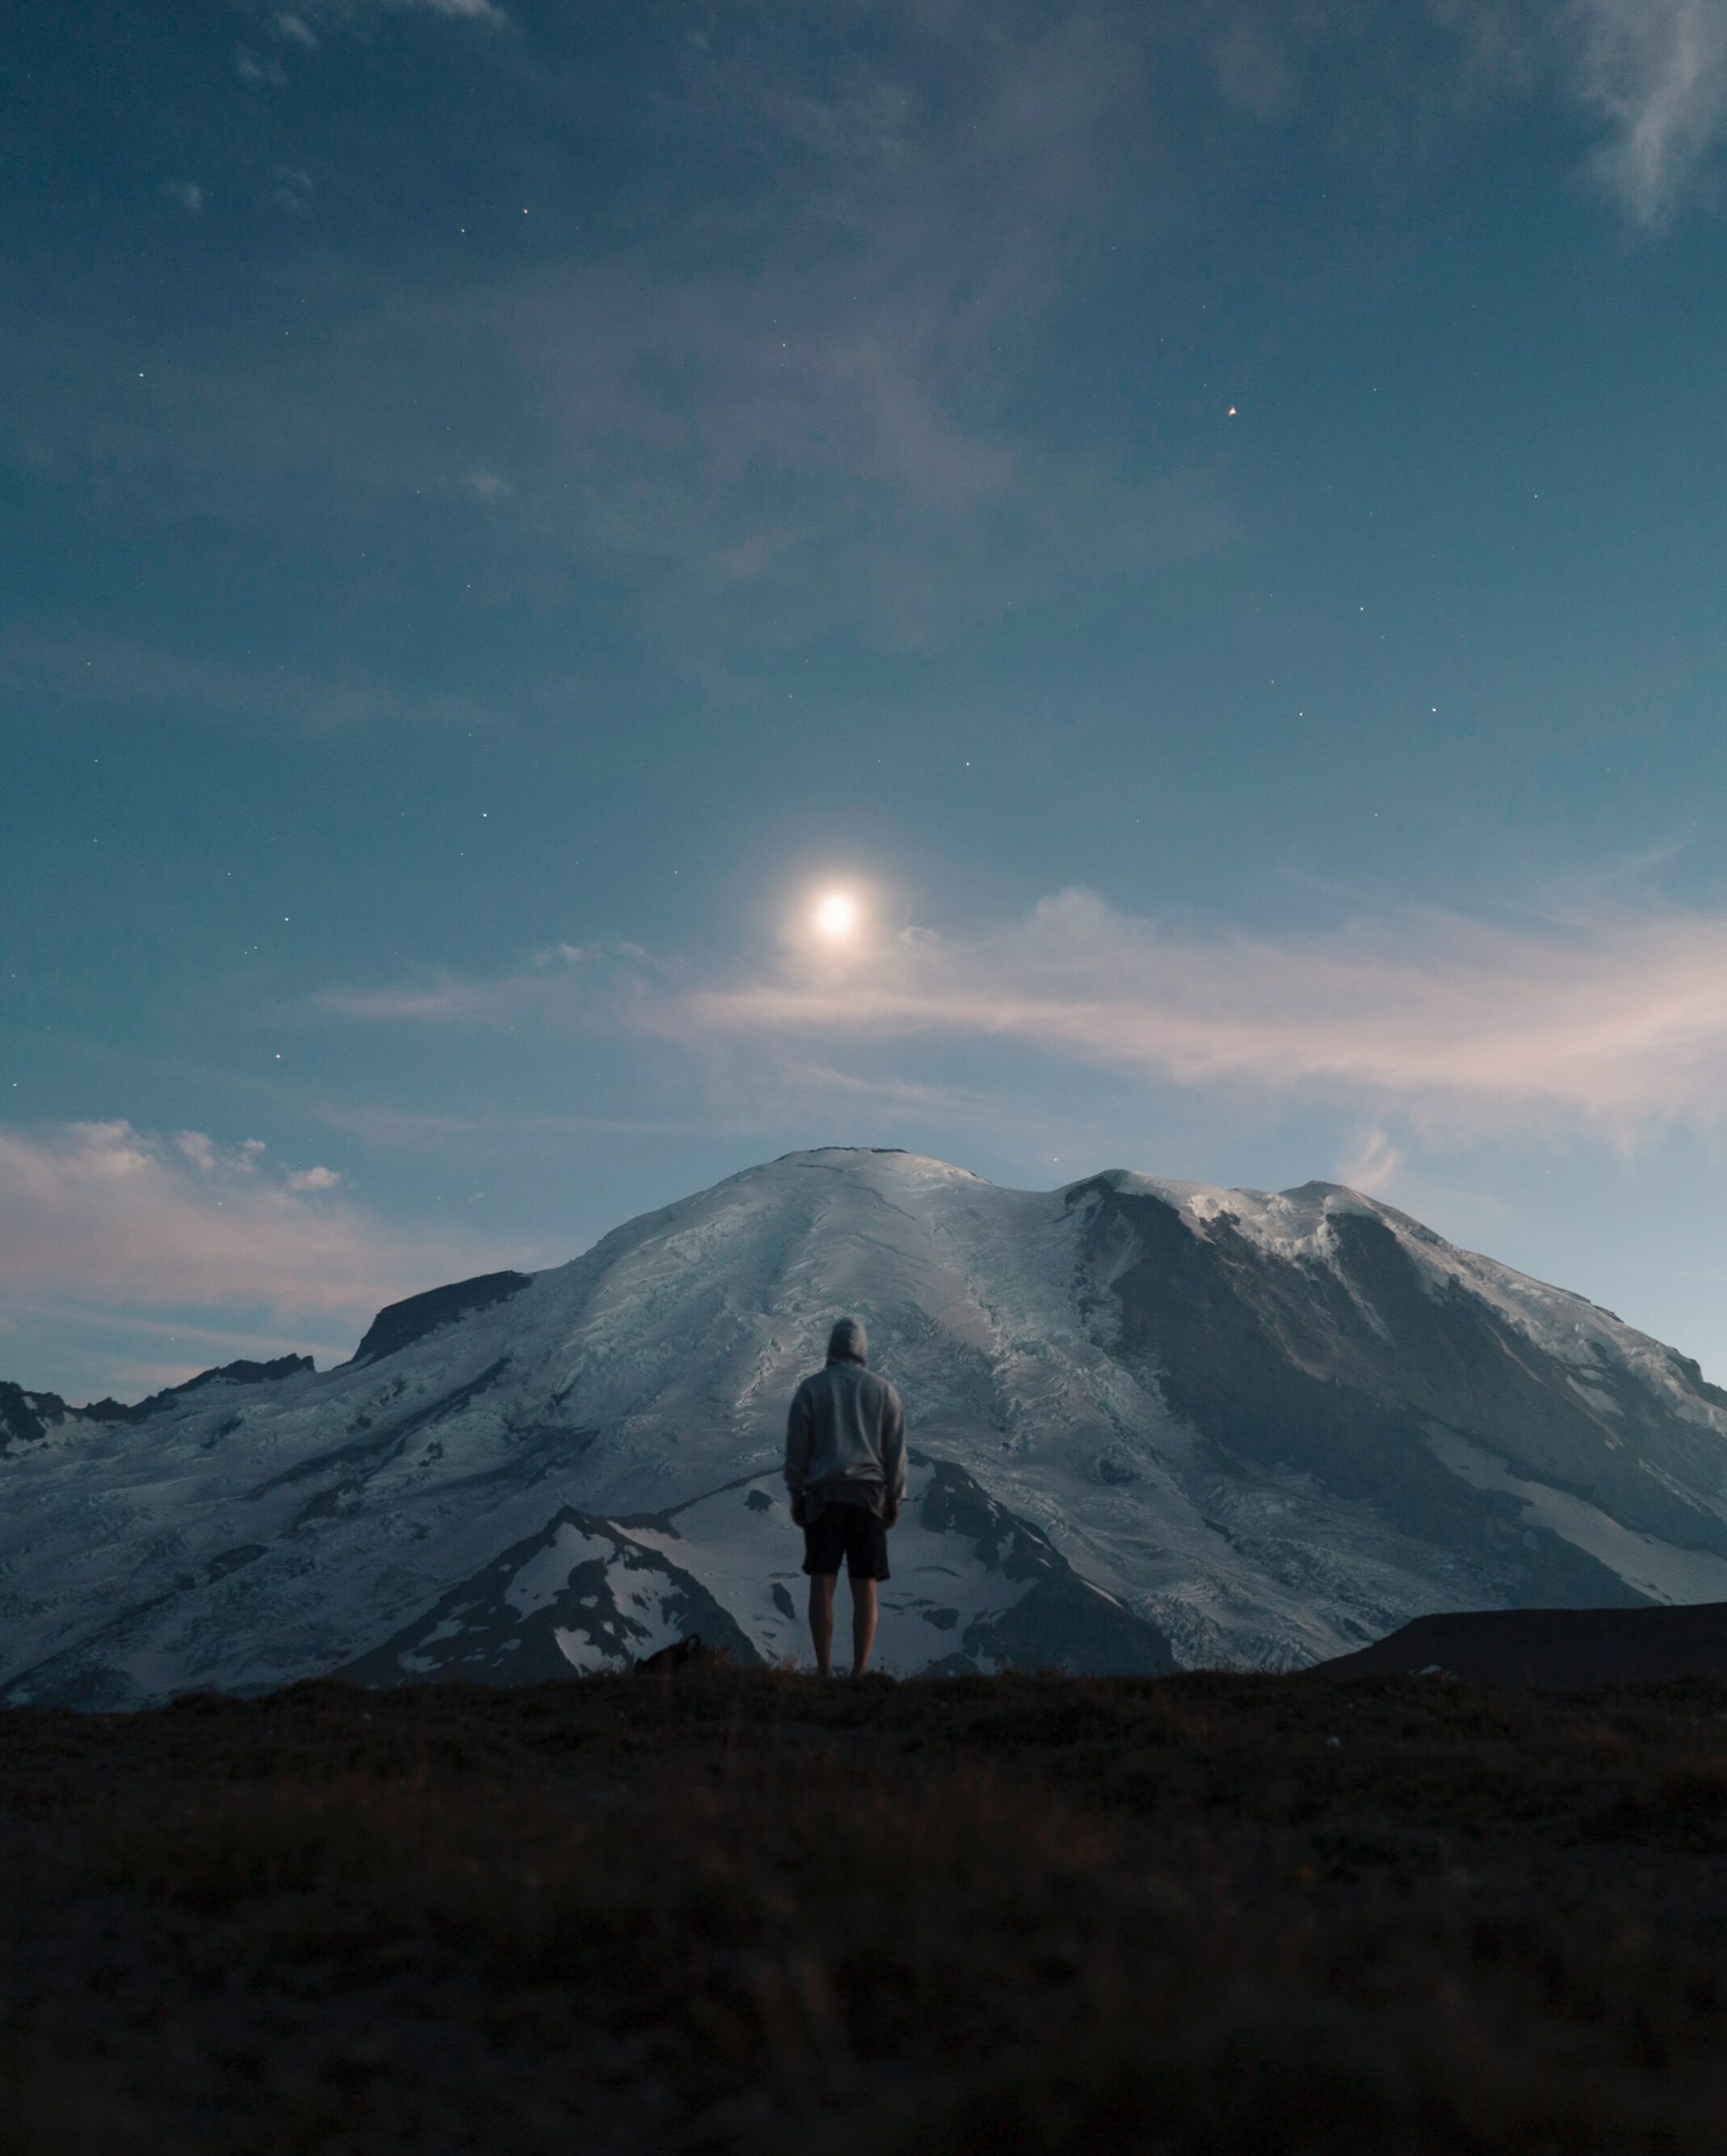 Man standing looking at a mountain which is covered in snow. The image is taken in the early evening as the sky is a darker blue and some stars are visible, along with the moon.